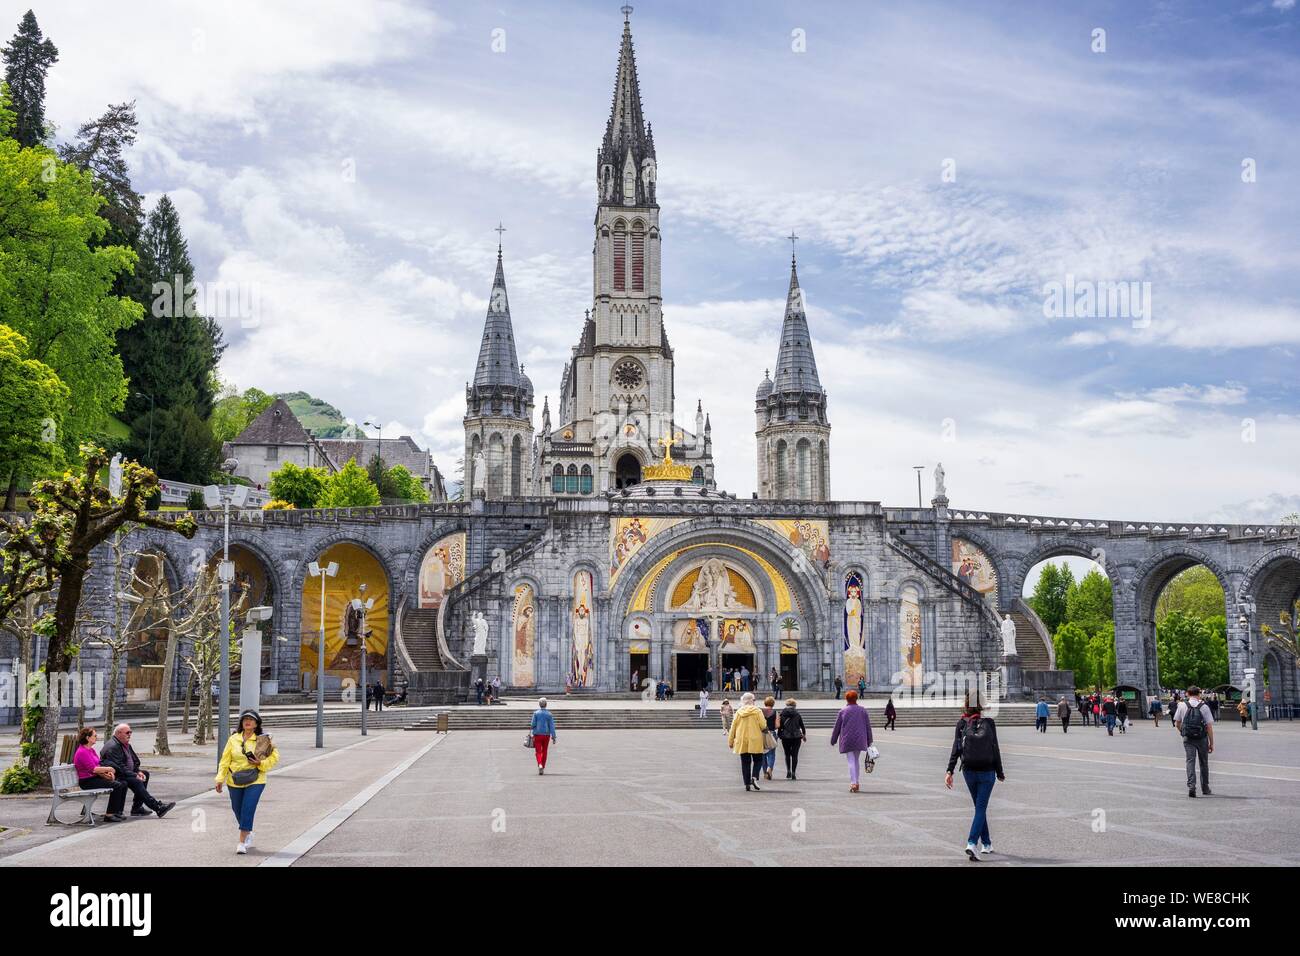 France, Hautes Pyrenees, Lourdes, Sanctuary of Our Lady of Lourdes, Basilica of the Immaculate Conception and Rosary Basilica Stock Photo